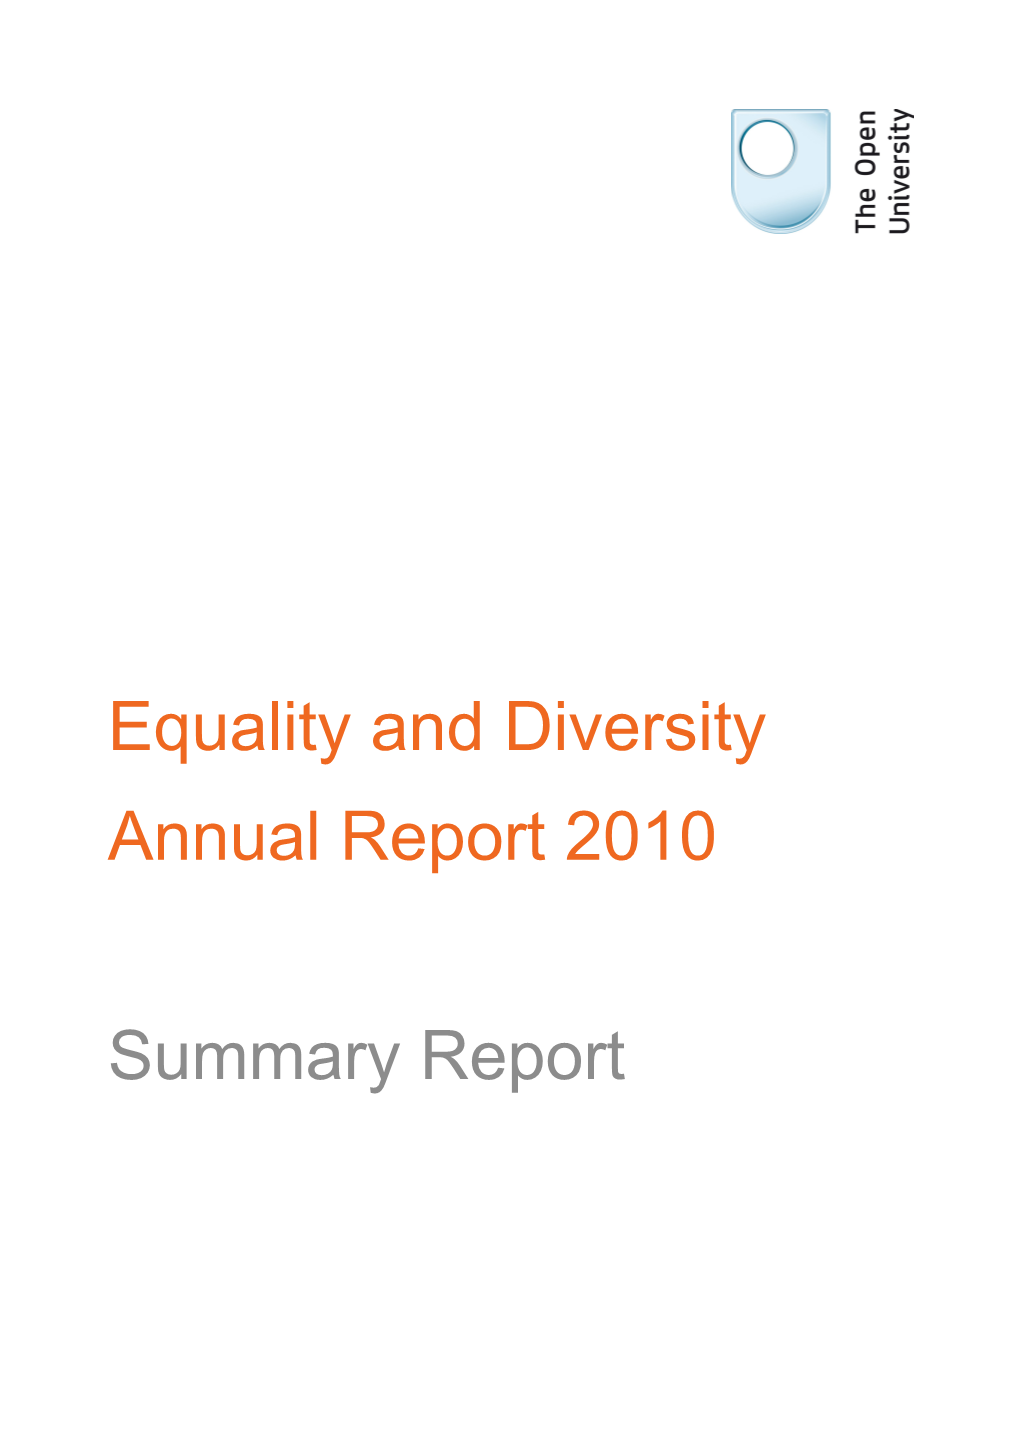 Equality and Diversity Summary Annual Report 2009